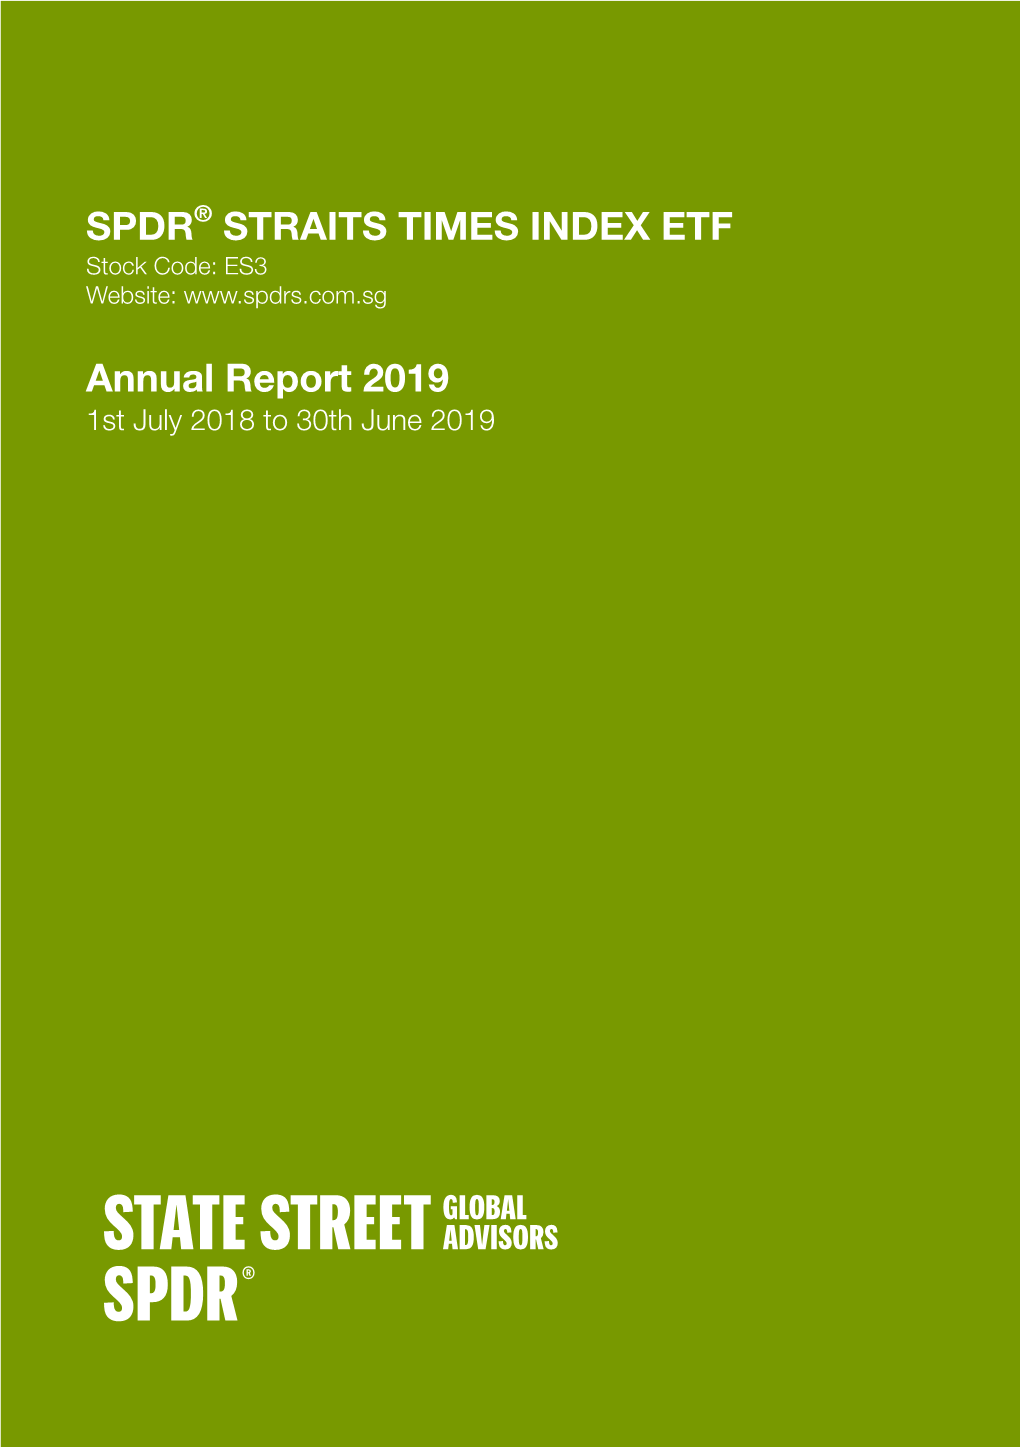 SPDR® STRAITS TIMES INDEX ETF Annual Report 2019